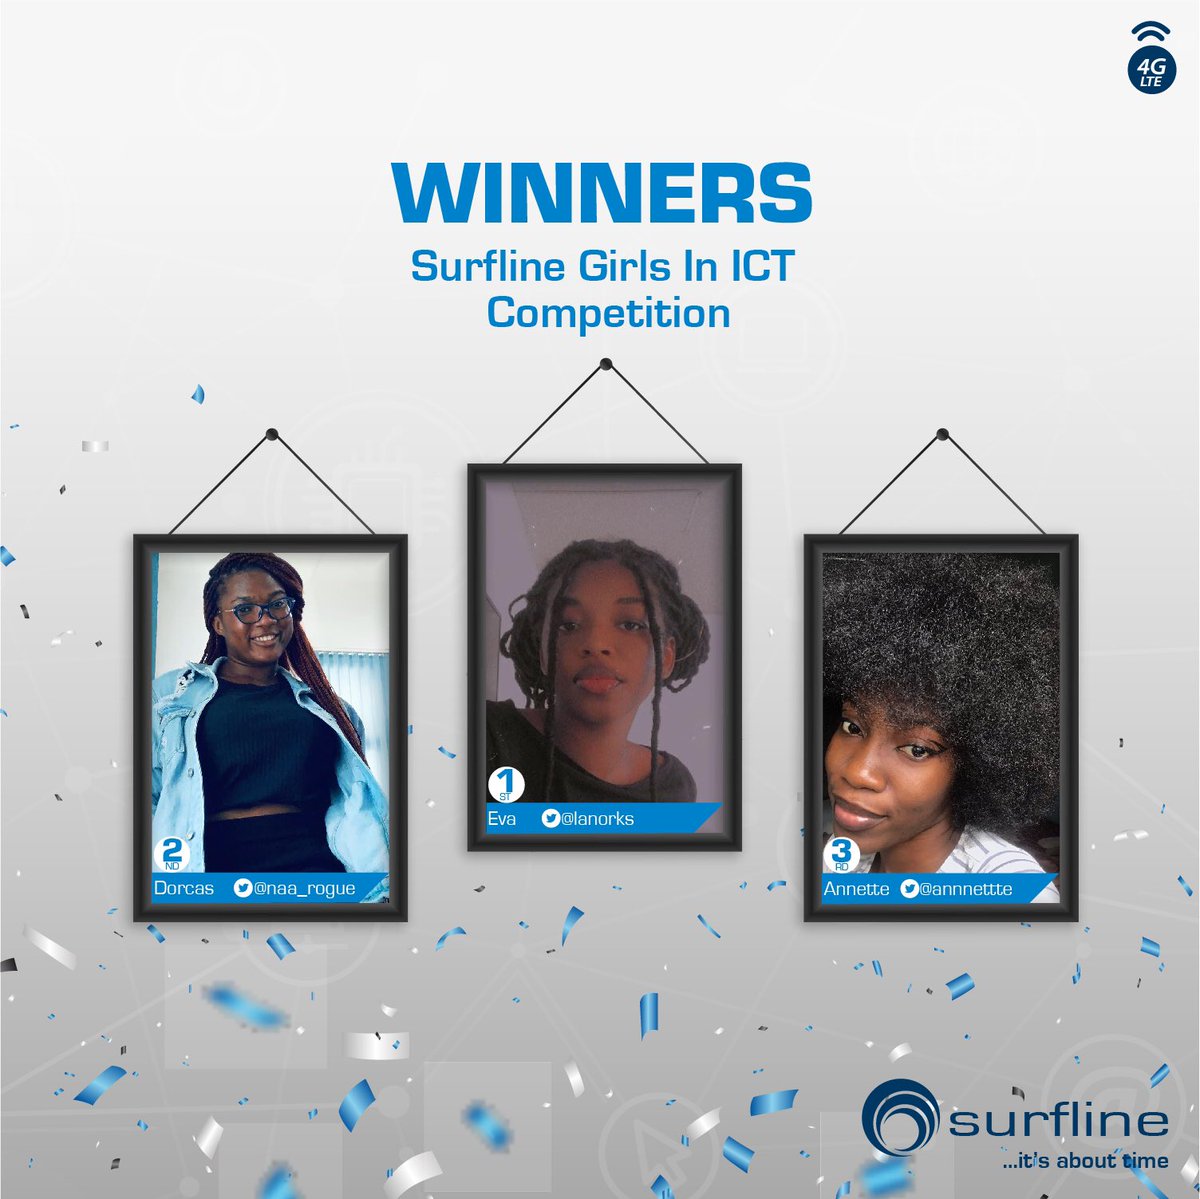 Congratulations to the winners of the Surfline International Girls in ICT competition.
@lanorks wins a MiFi and unlimited data for a year
@naa_rogue wins a MiFi and unlimited data for 6 months
@annnettte_ wins a MiFi and unlimited data for 3 months.
#InternationalGirlsinICTDay